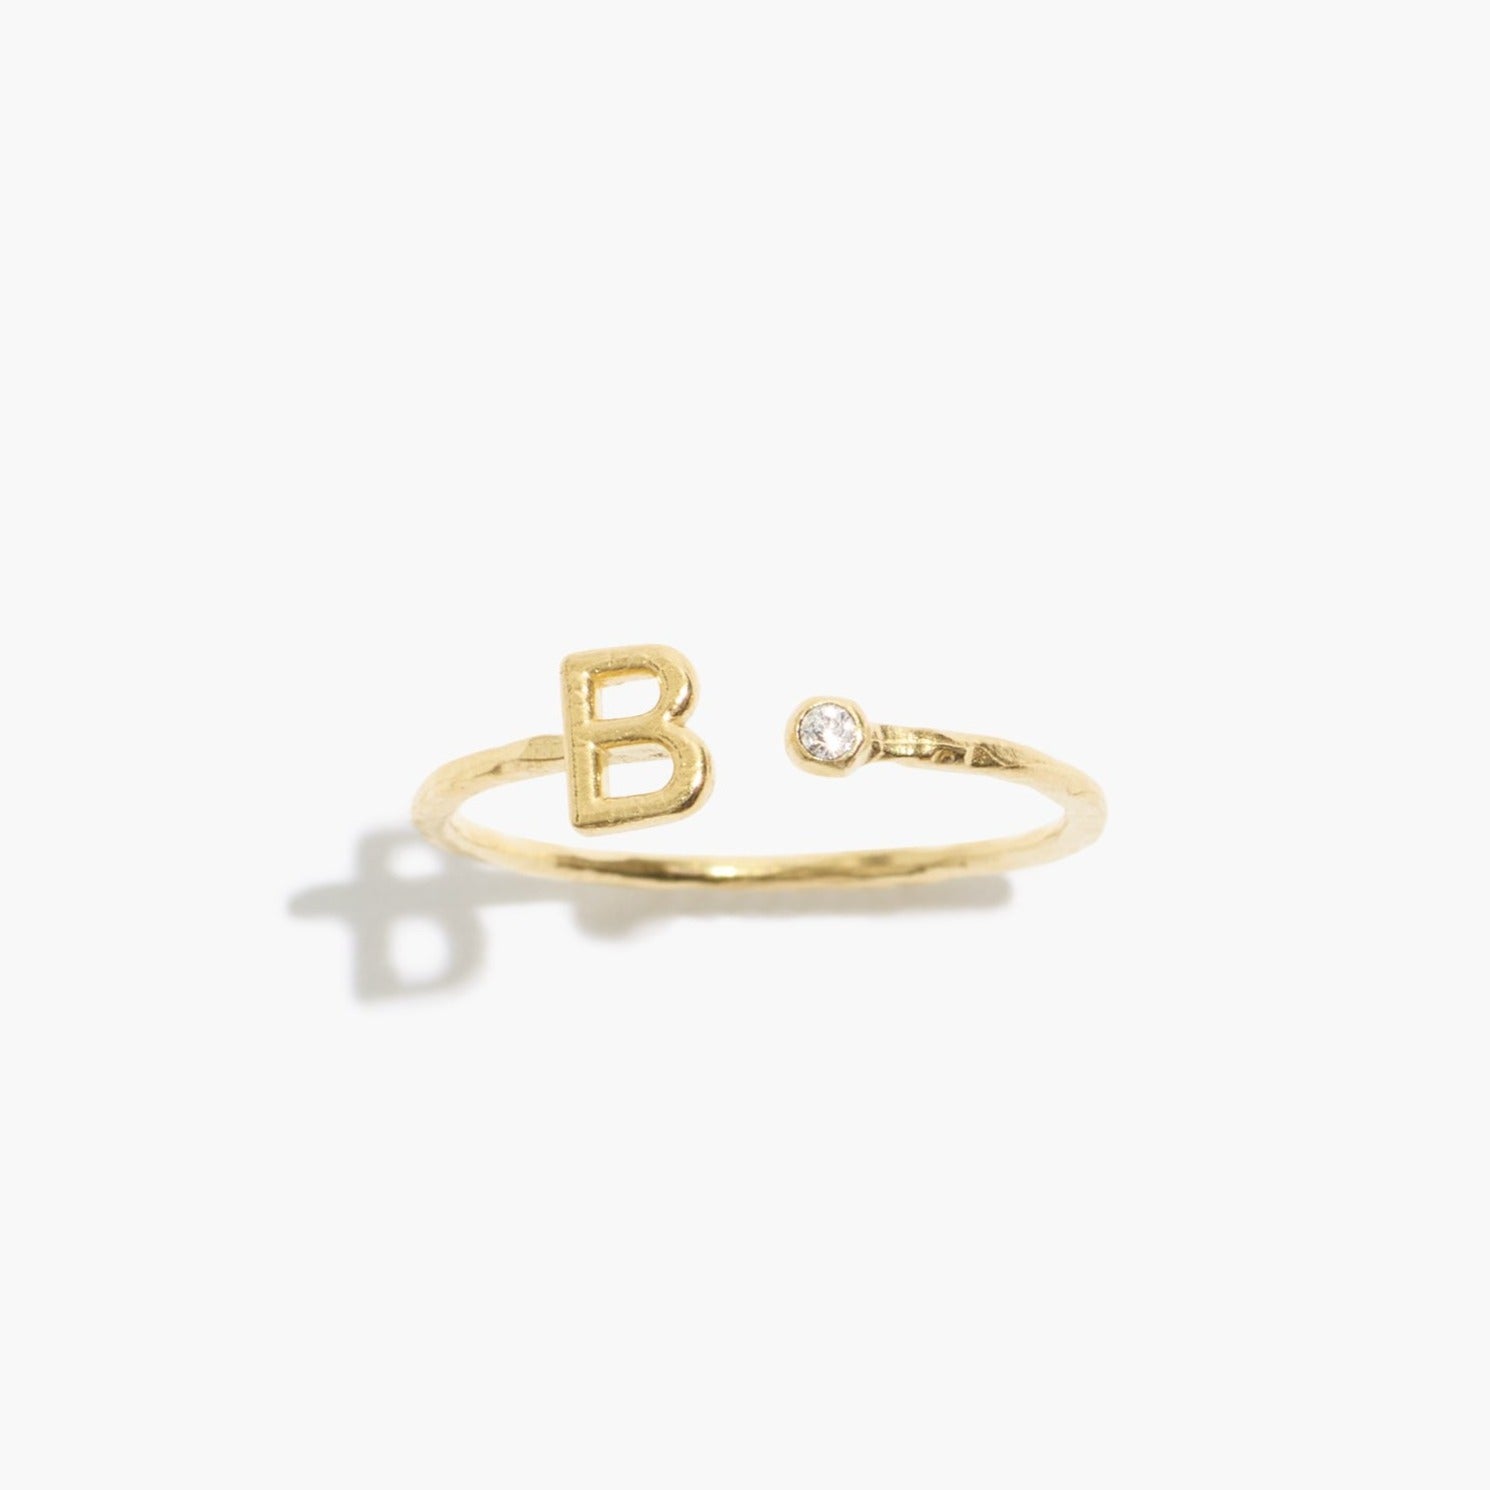 B_Katie_Dean_Initial_Ring_made in America, delicate adjustable stacking ring